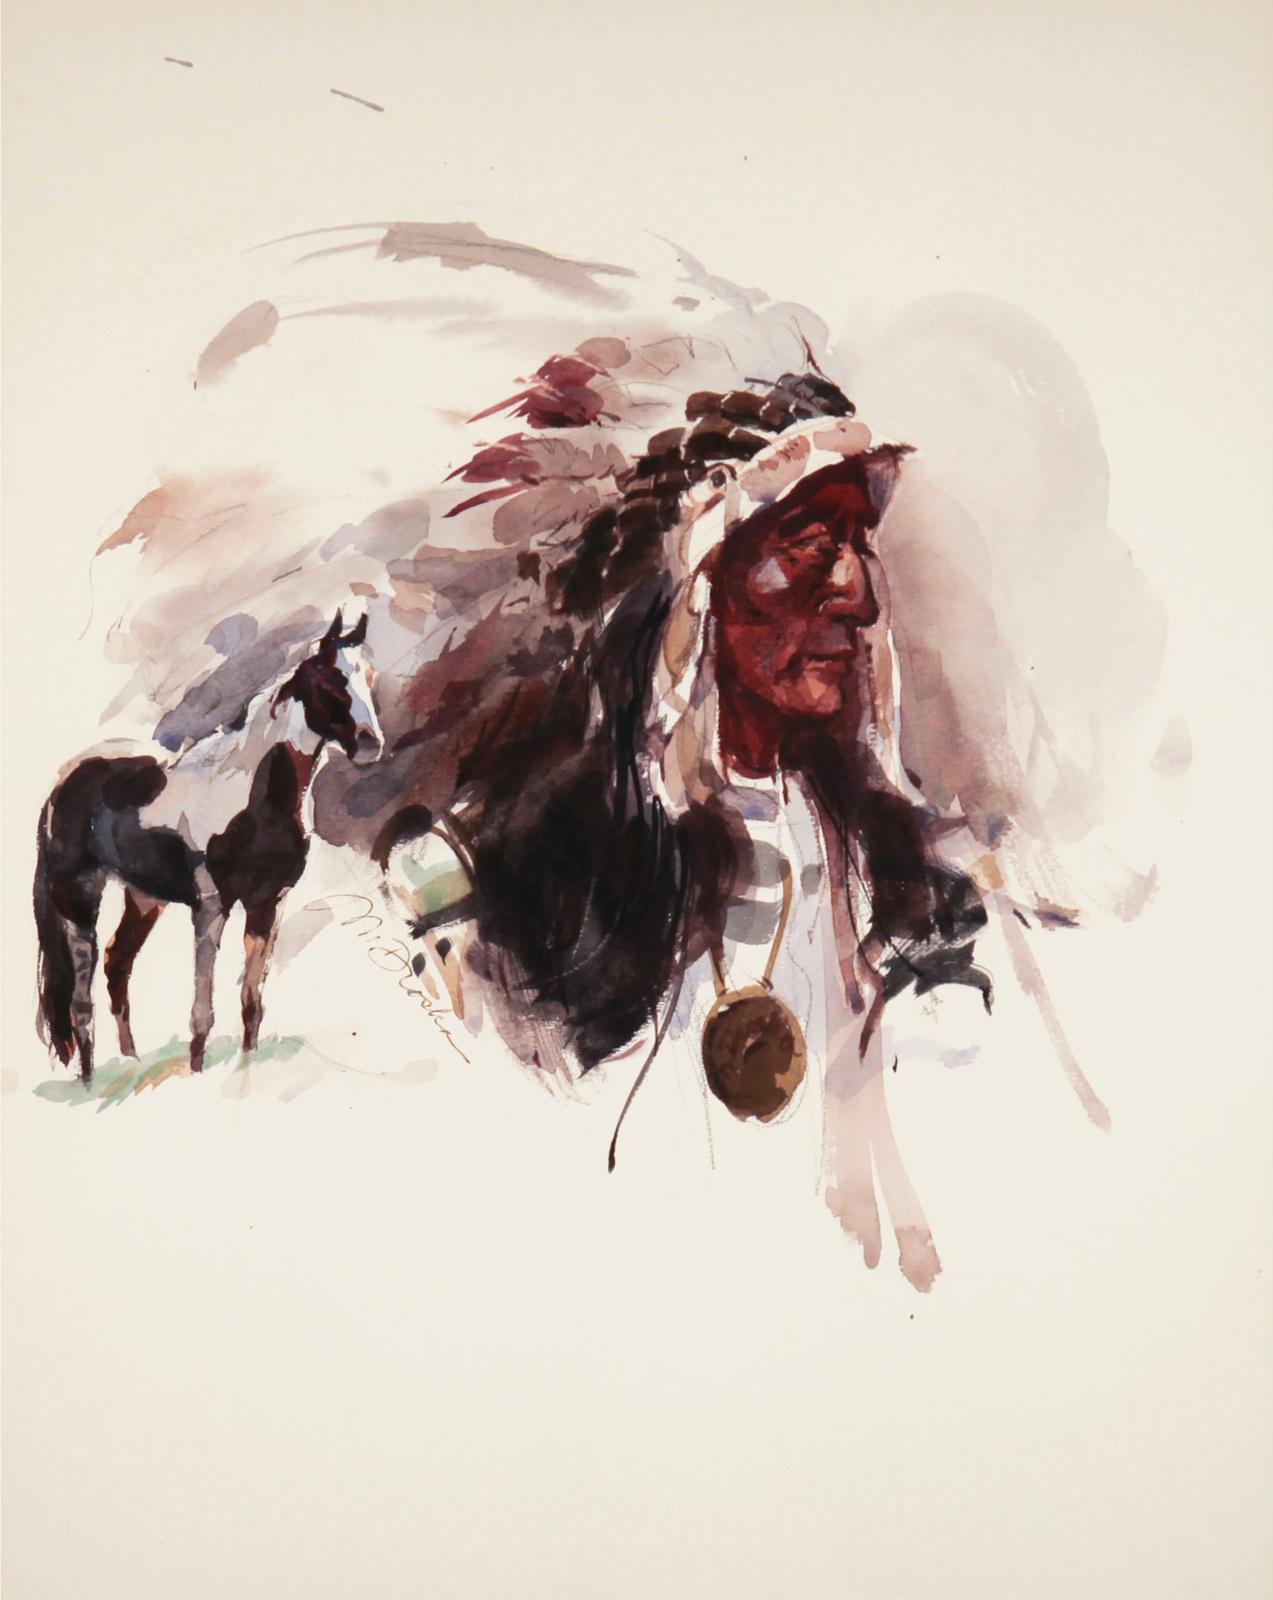 John Droska (1920-2005) - North American Indian In A Feathered Headdress His Stallion At His Side, 1977